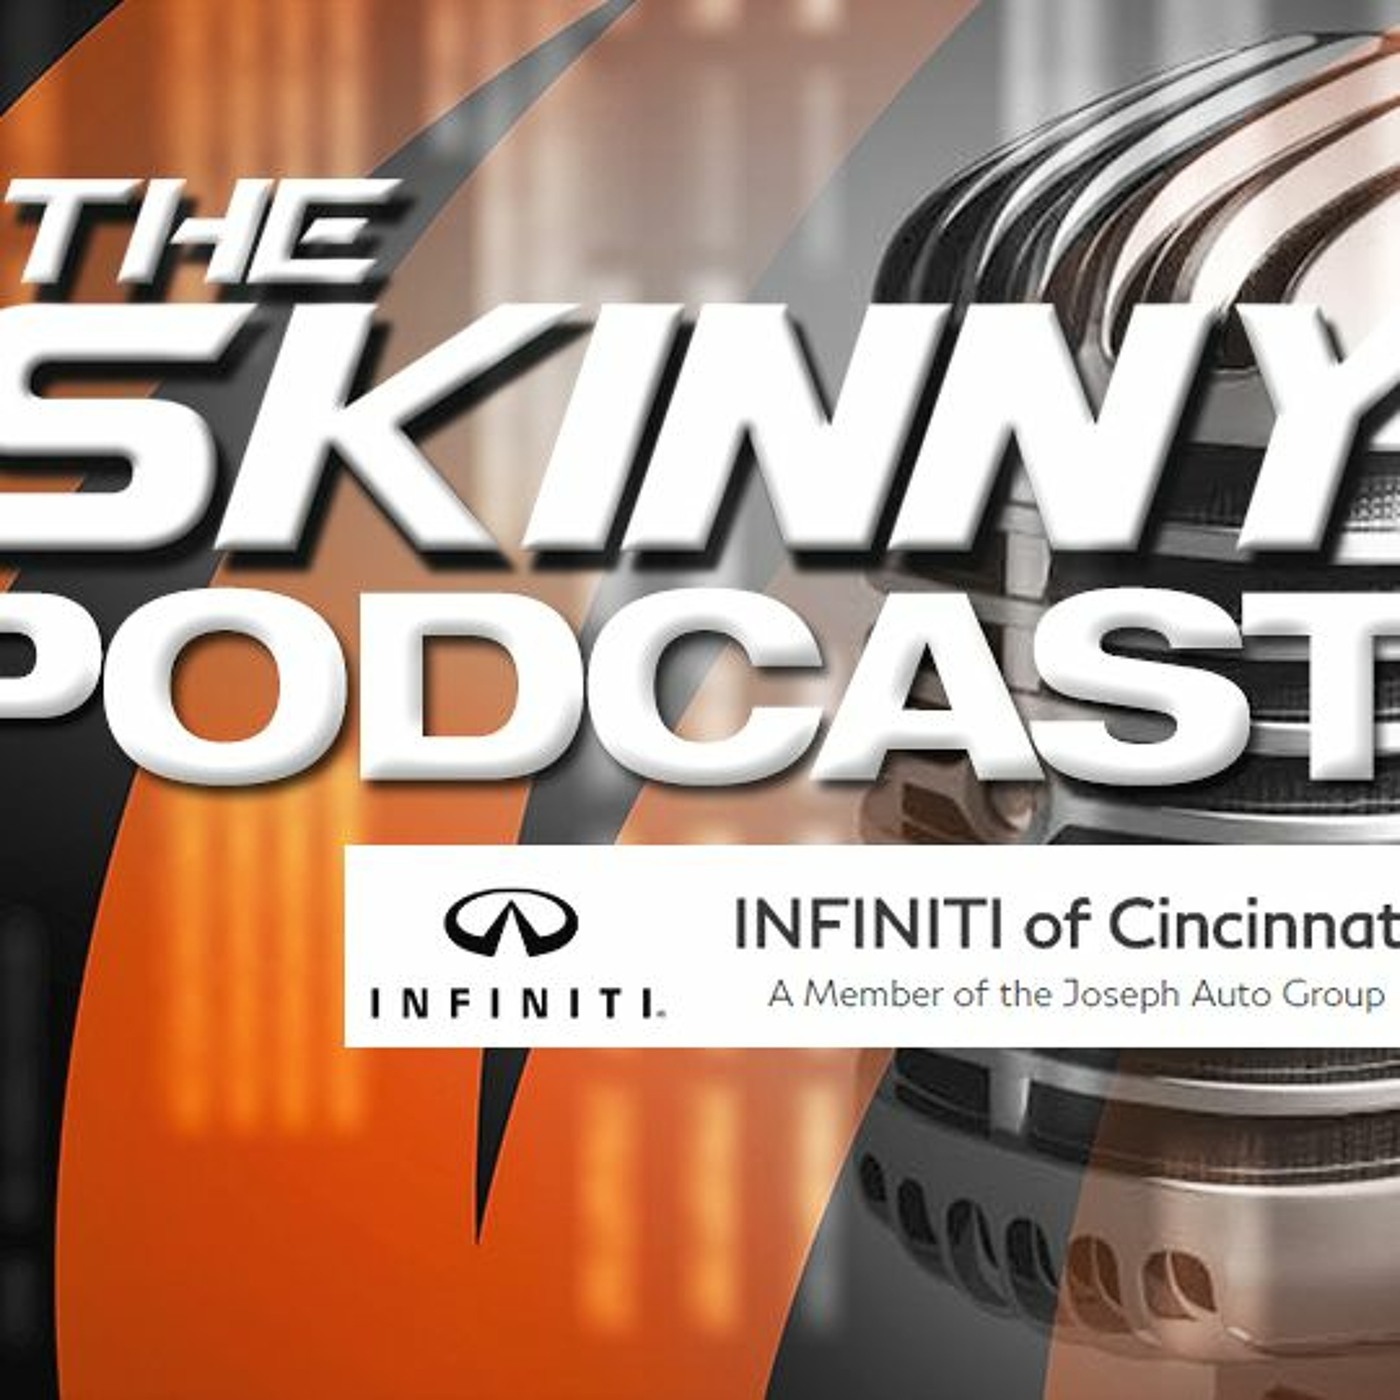 The Skinny Podcast: Bengals 2018 Off-season Episode 2 NFL Draft preview (4/25/18)